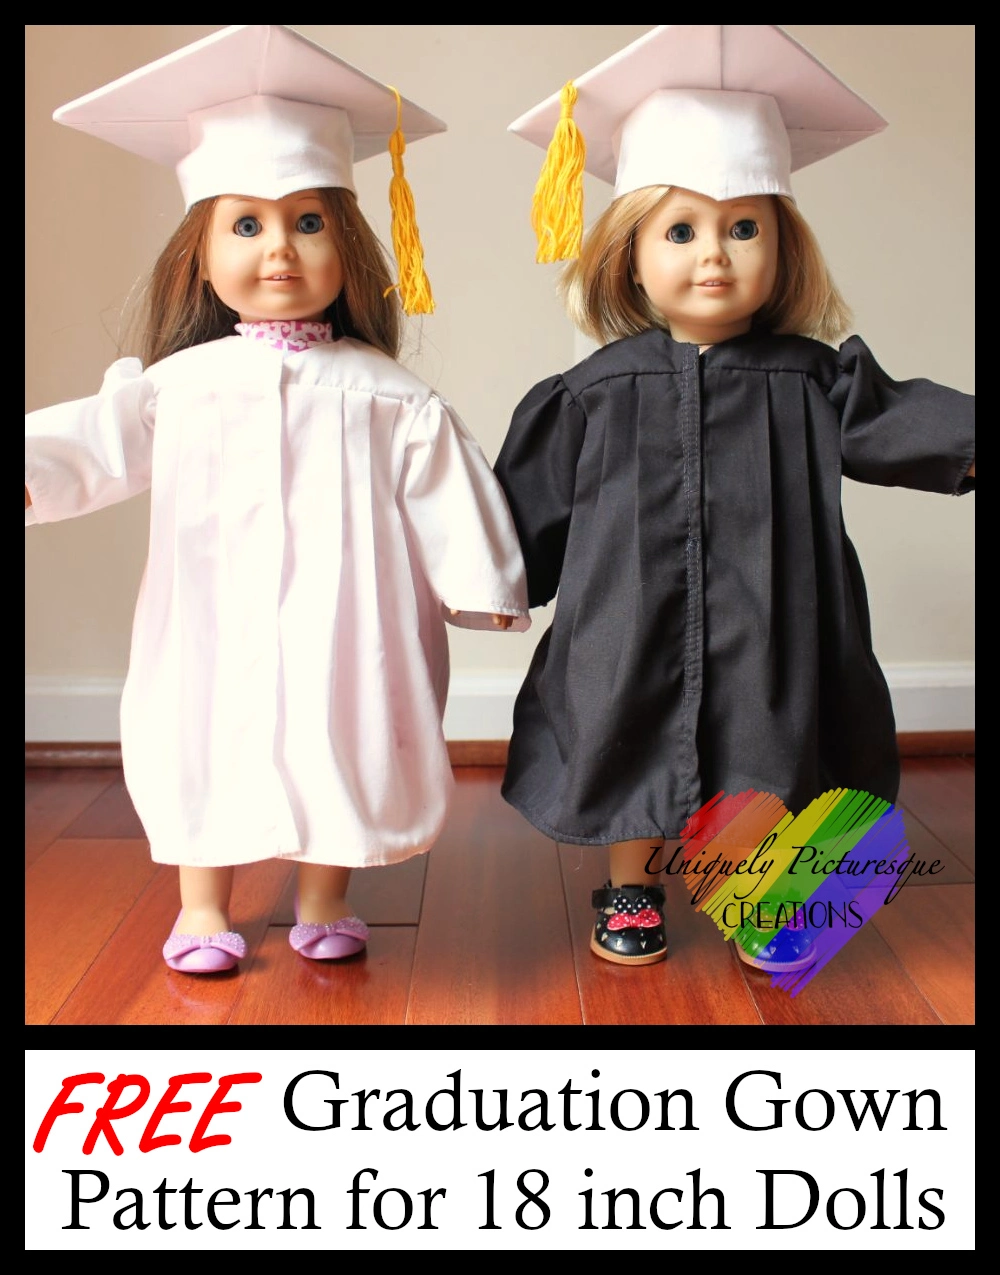 Graduation Cap and Gown Pattern